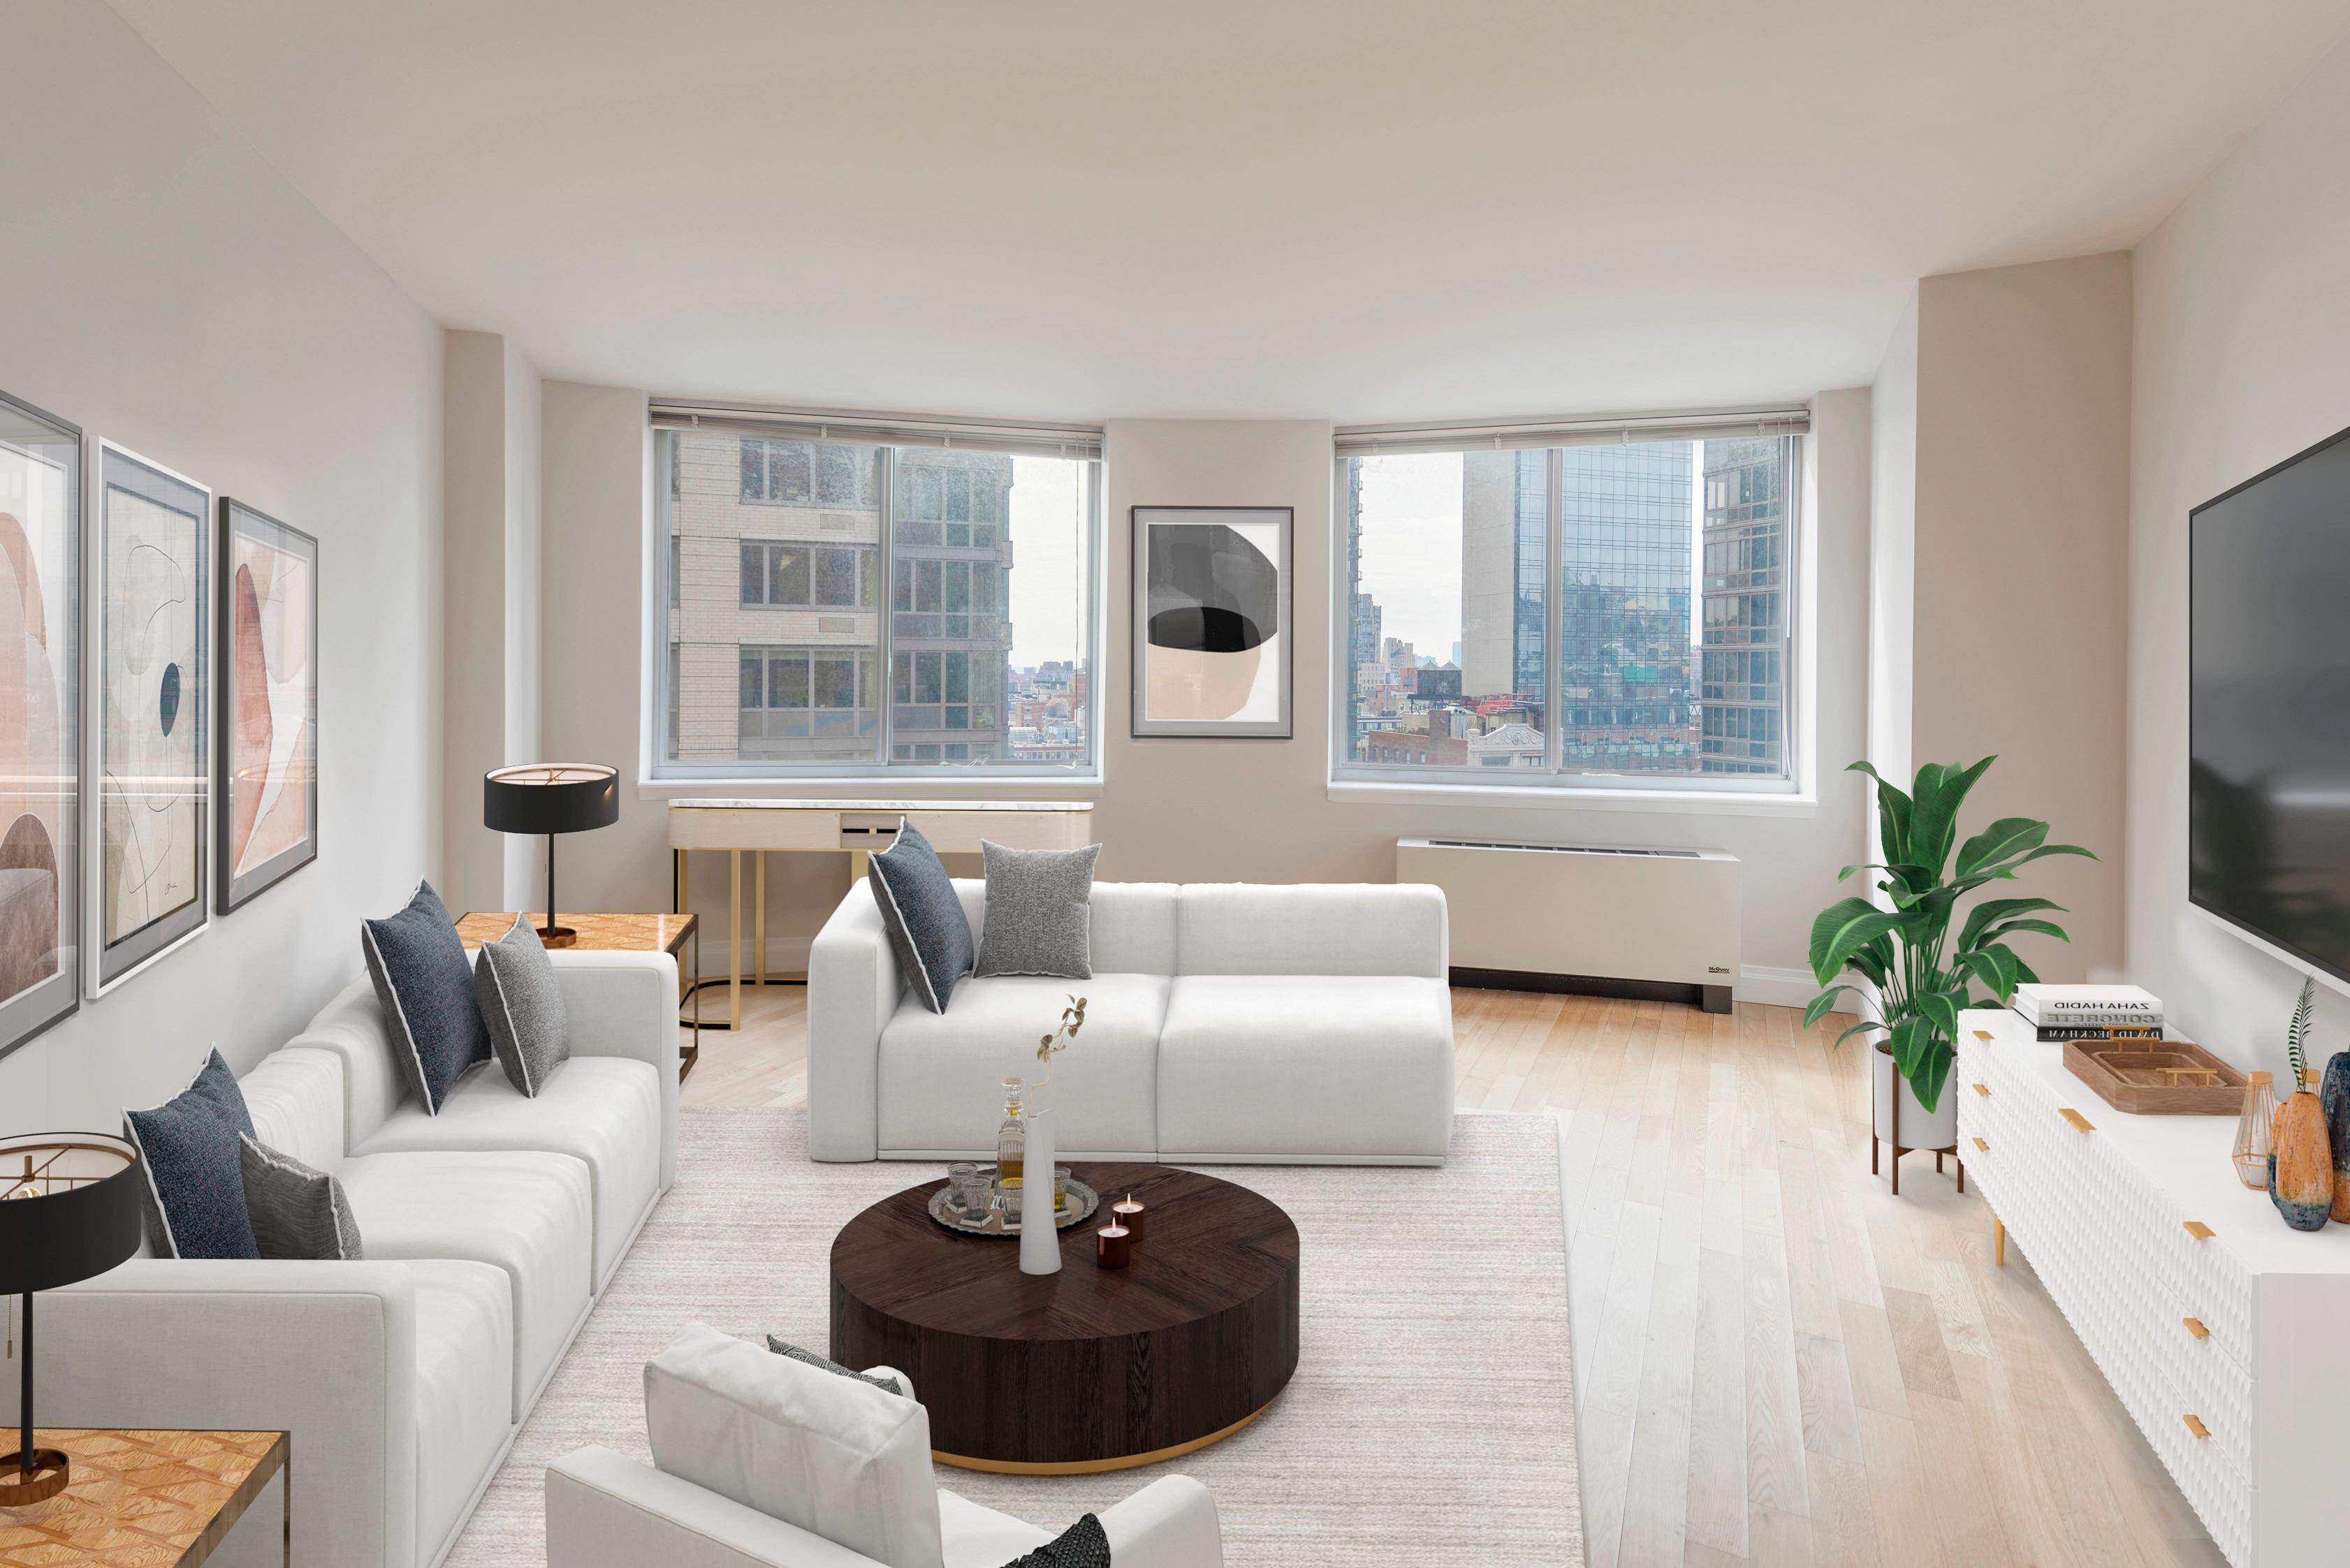 LIVE IN LUXURY IN CHELSEA - 1 BEDROOM WITH EXCELLENT NATURAL LIGHT AND MODERN KITCHEN